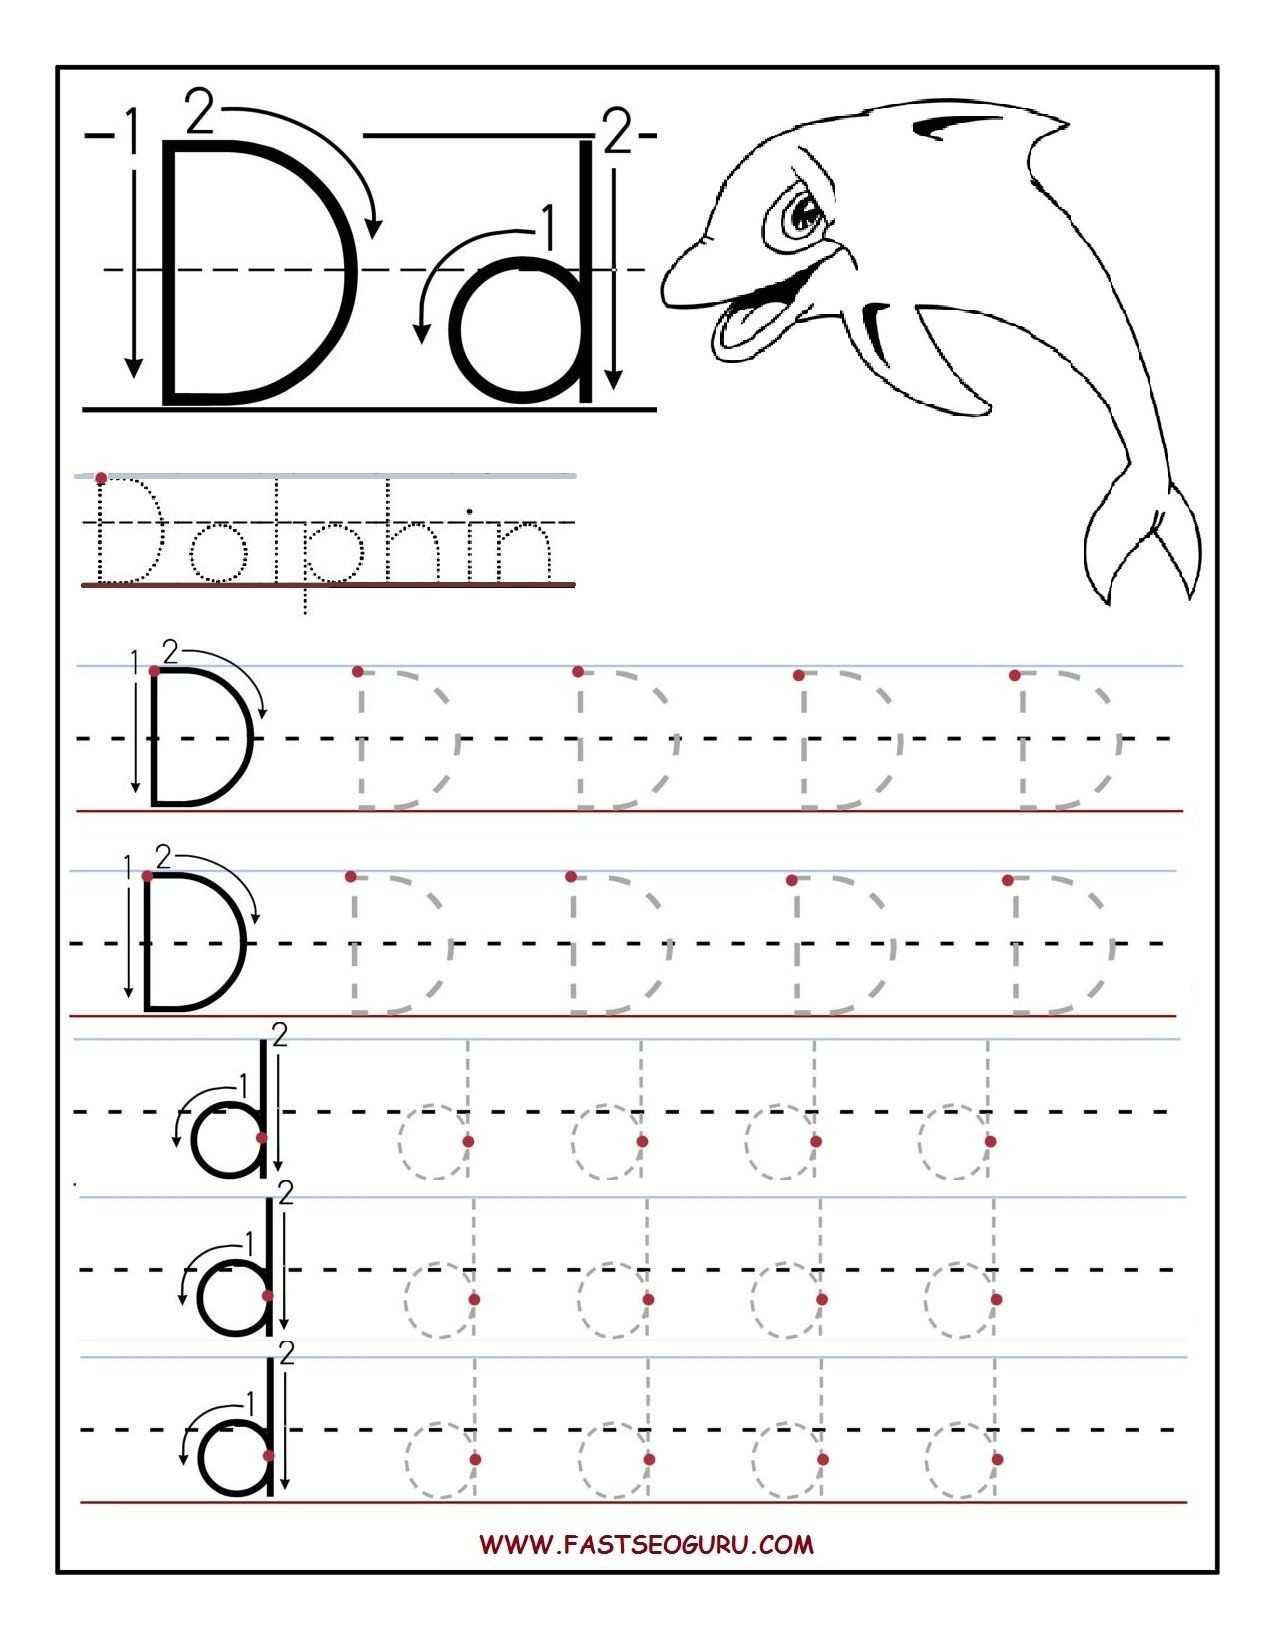 Alphabet Tracing Worksheets for 3 Year Olds Along with Free Registration Sample 2018 Letter Writing Template Kindergarten